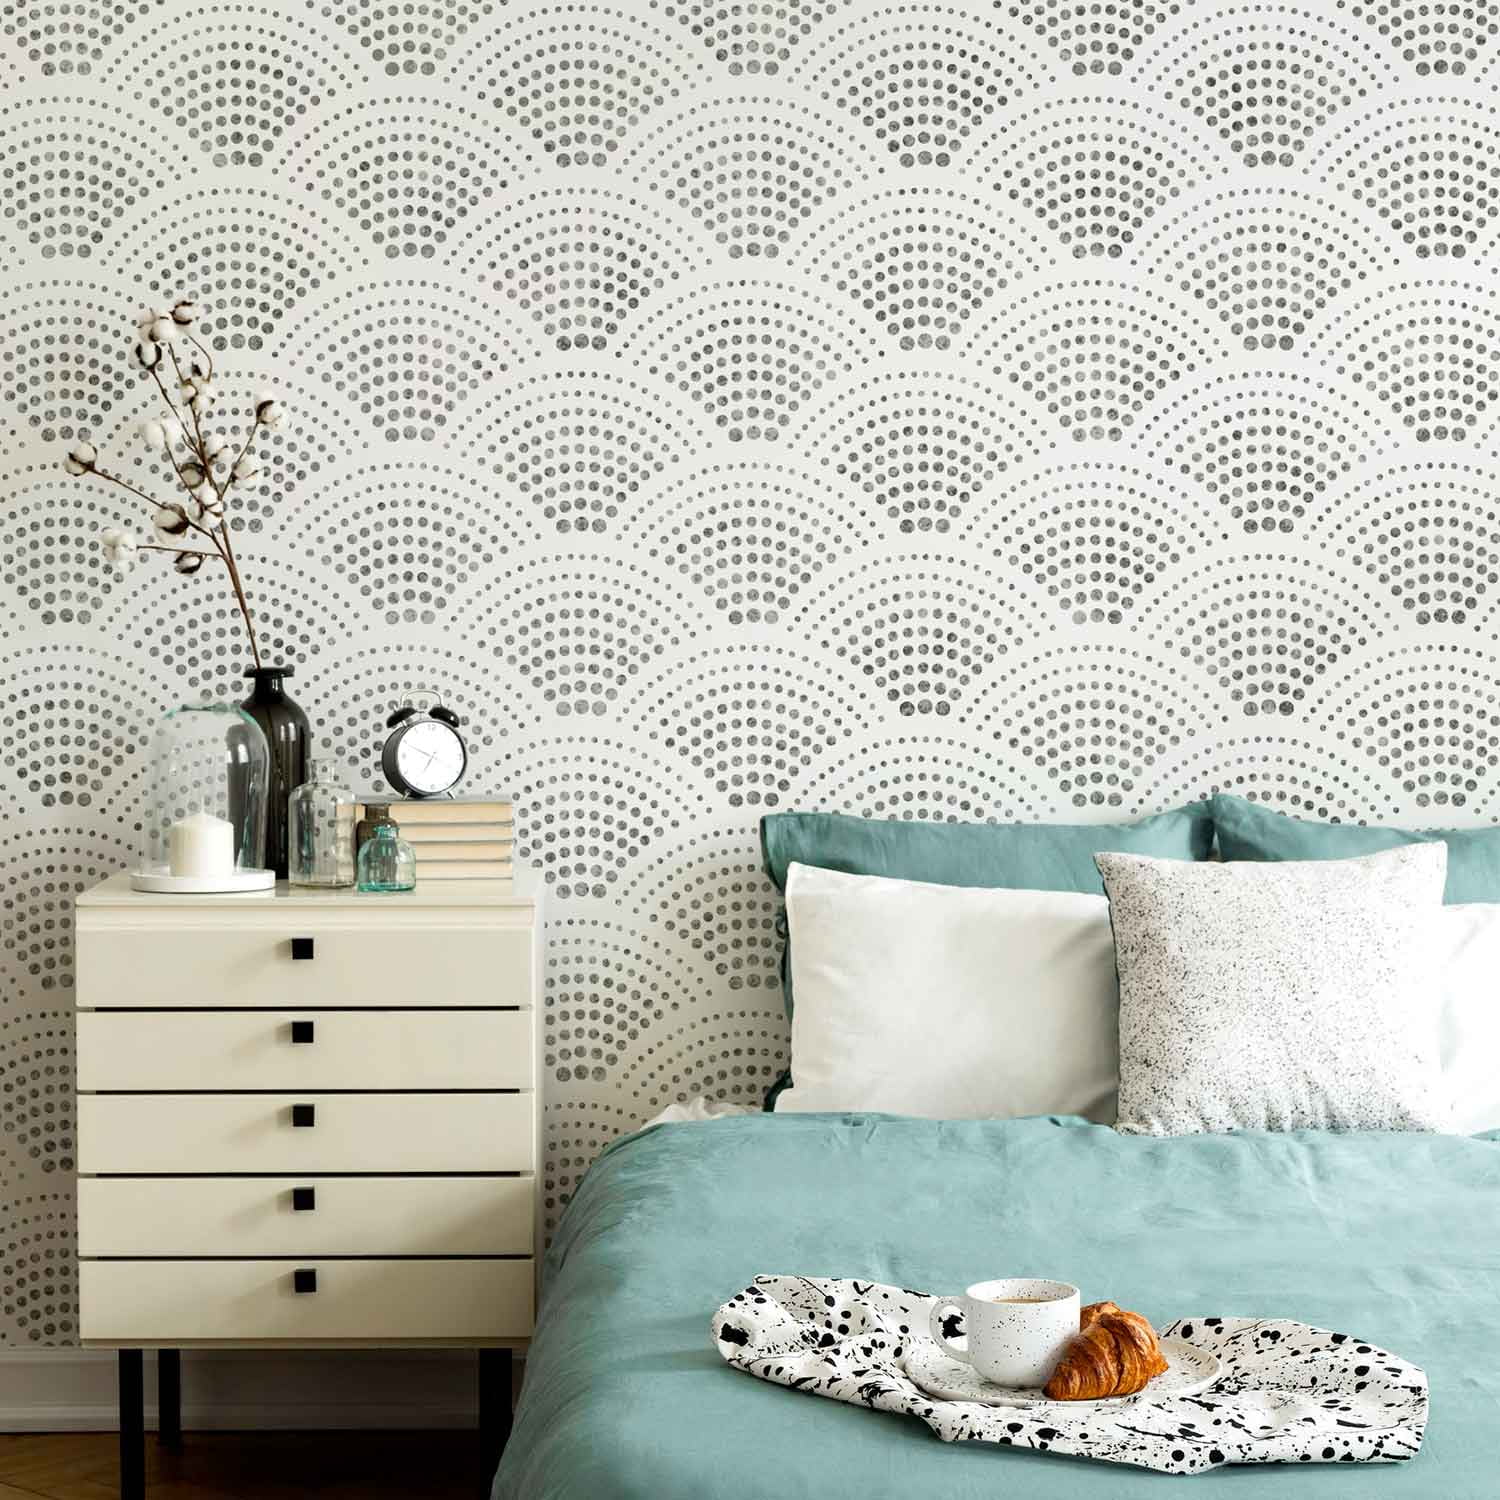 SHELLY Scallop Wall Stencil Large Wall Decor Stencils Reusable